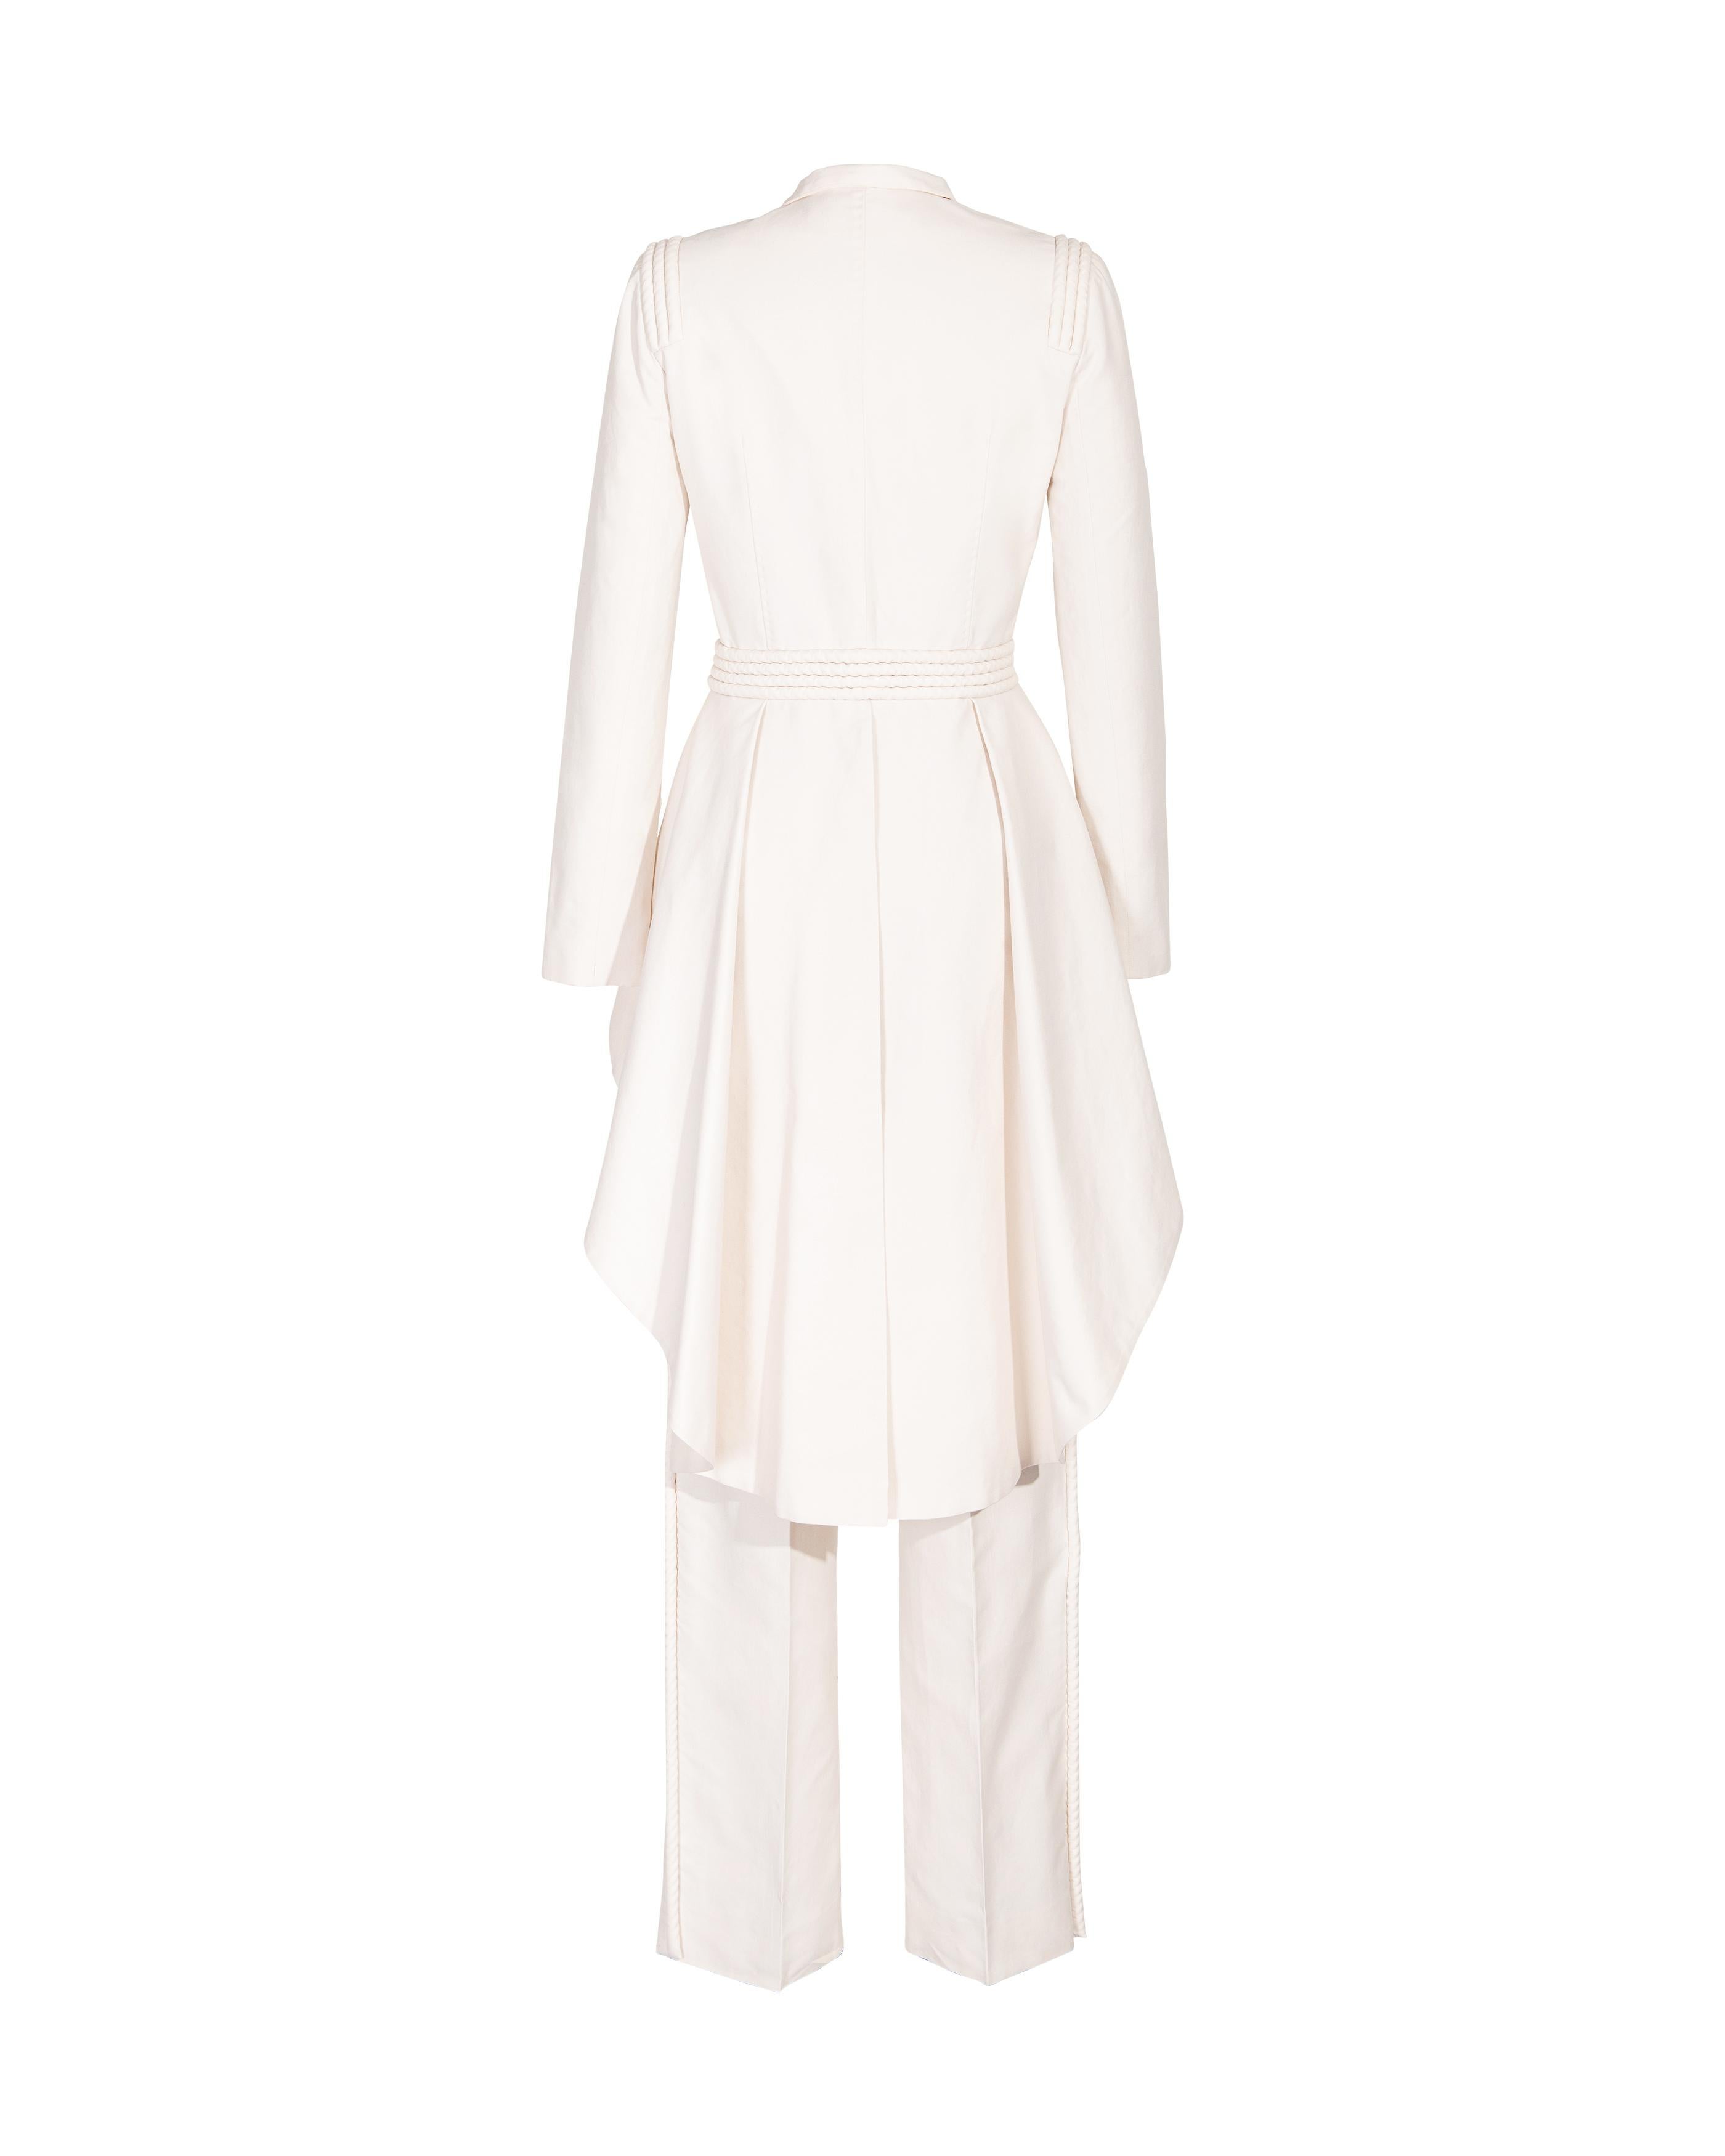 Women's S/S 2002 Givenchy Cotton Cream High-Low Jacket and Pant Set